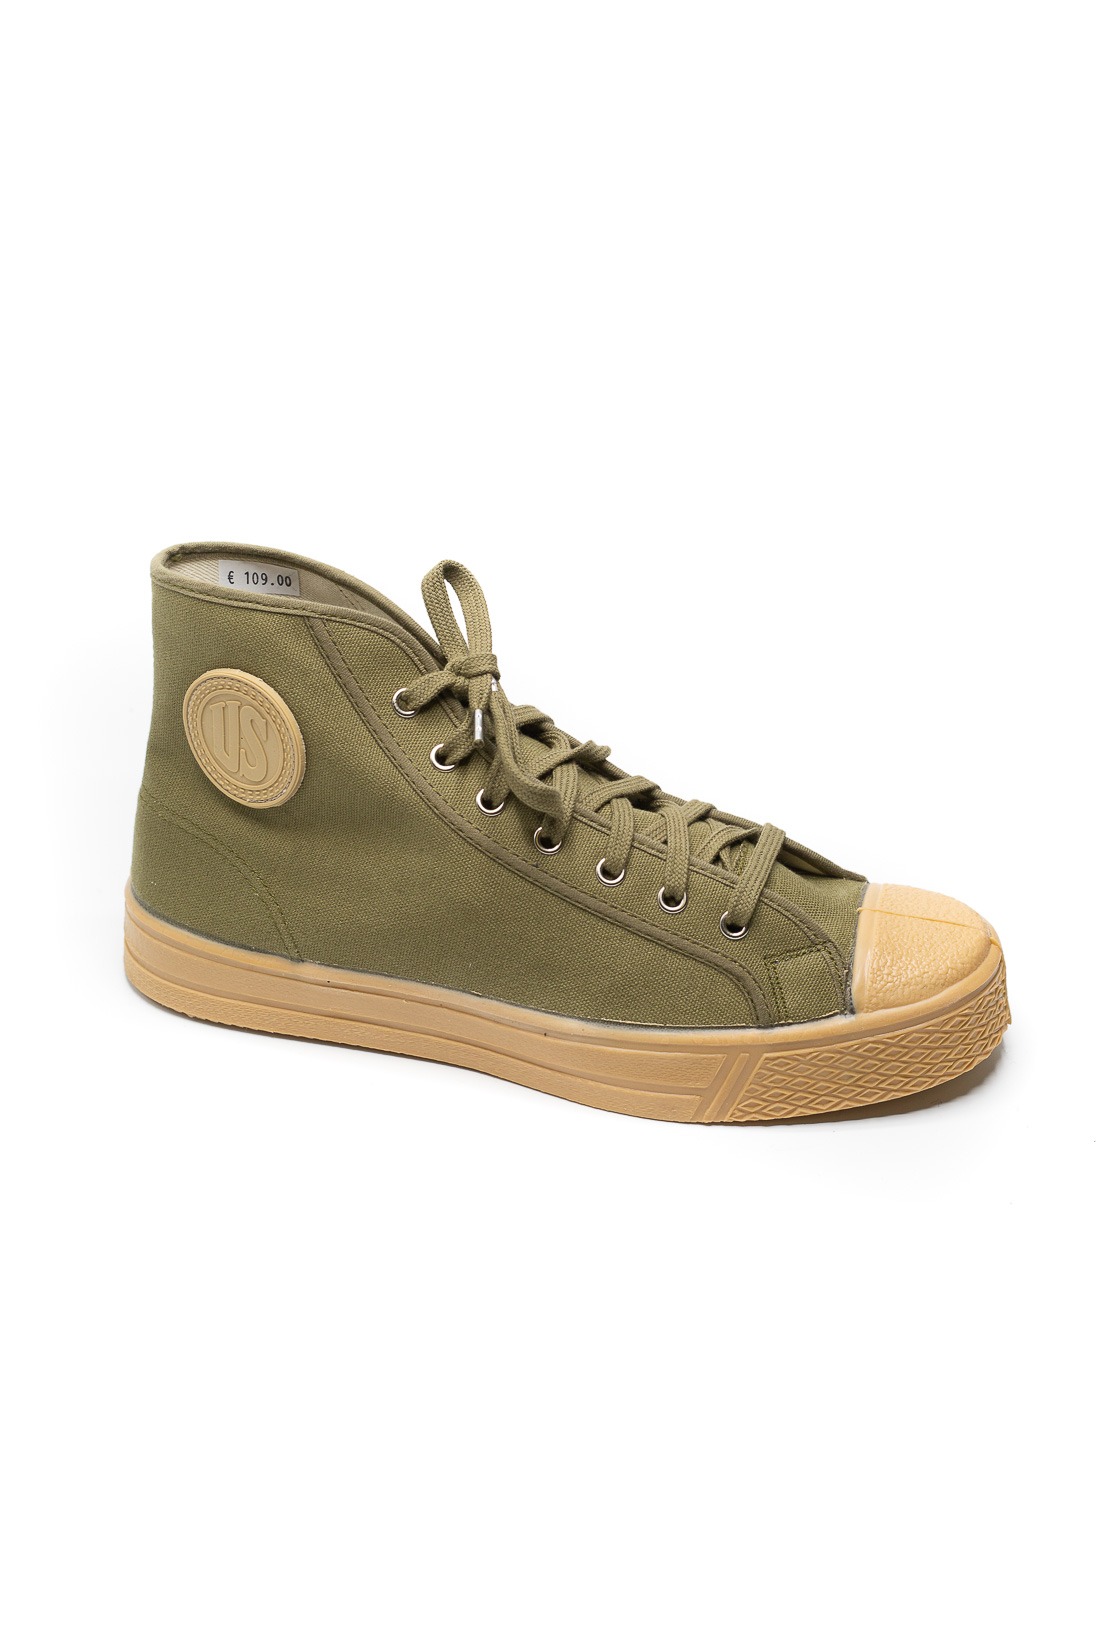 US Rubber Military High Top - Military Green - Pinkomo